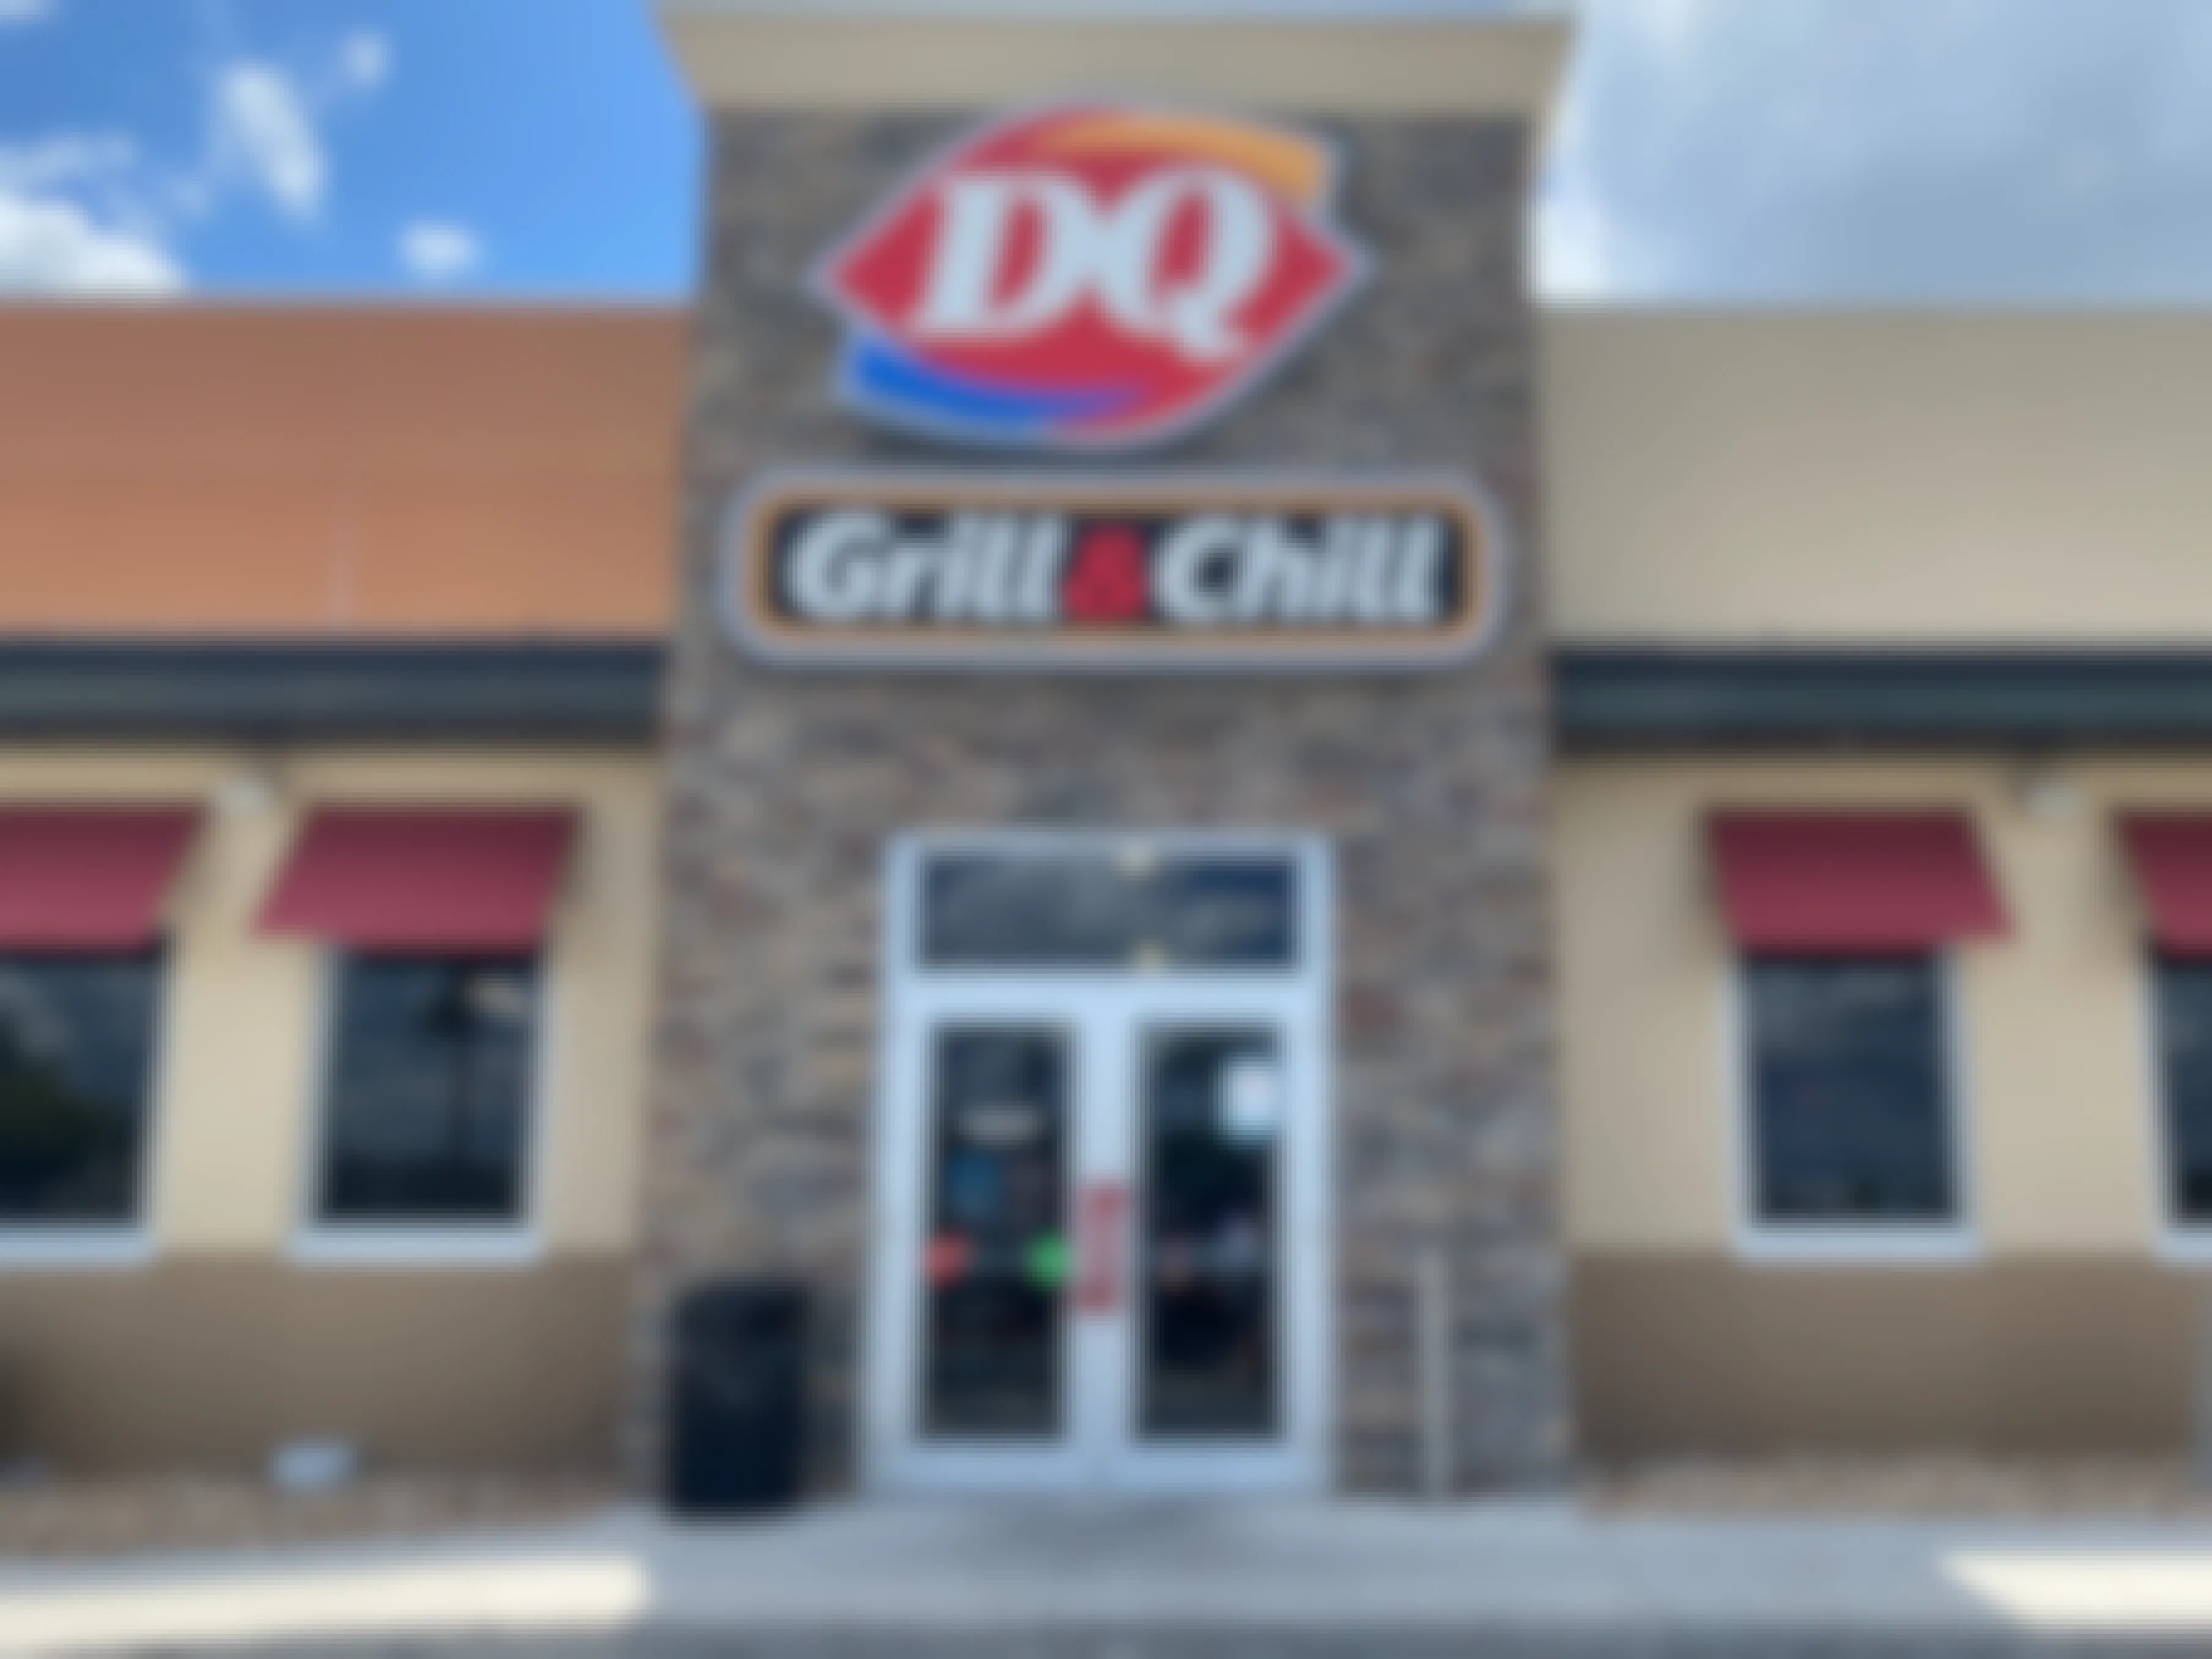 A Dairy Queen Grill & Chill storefront.